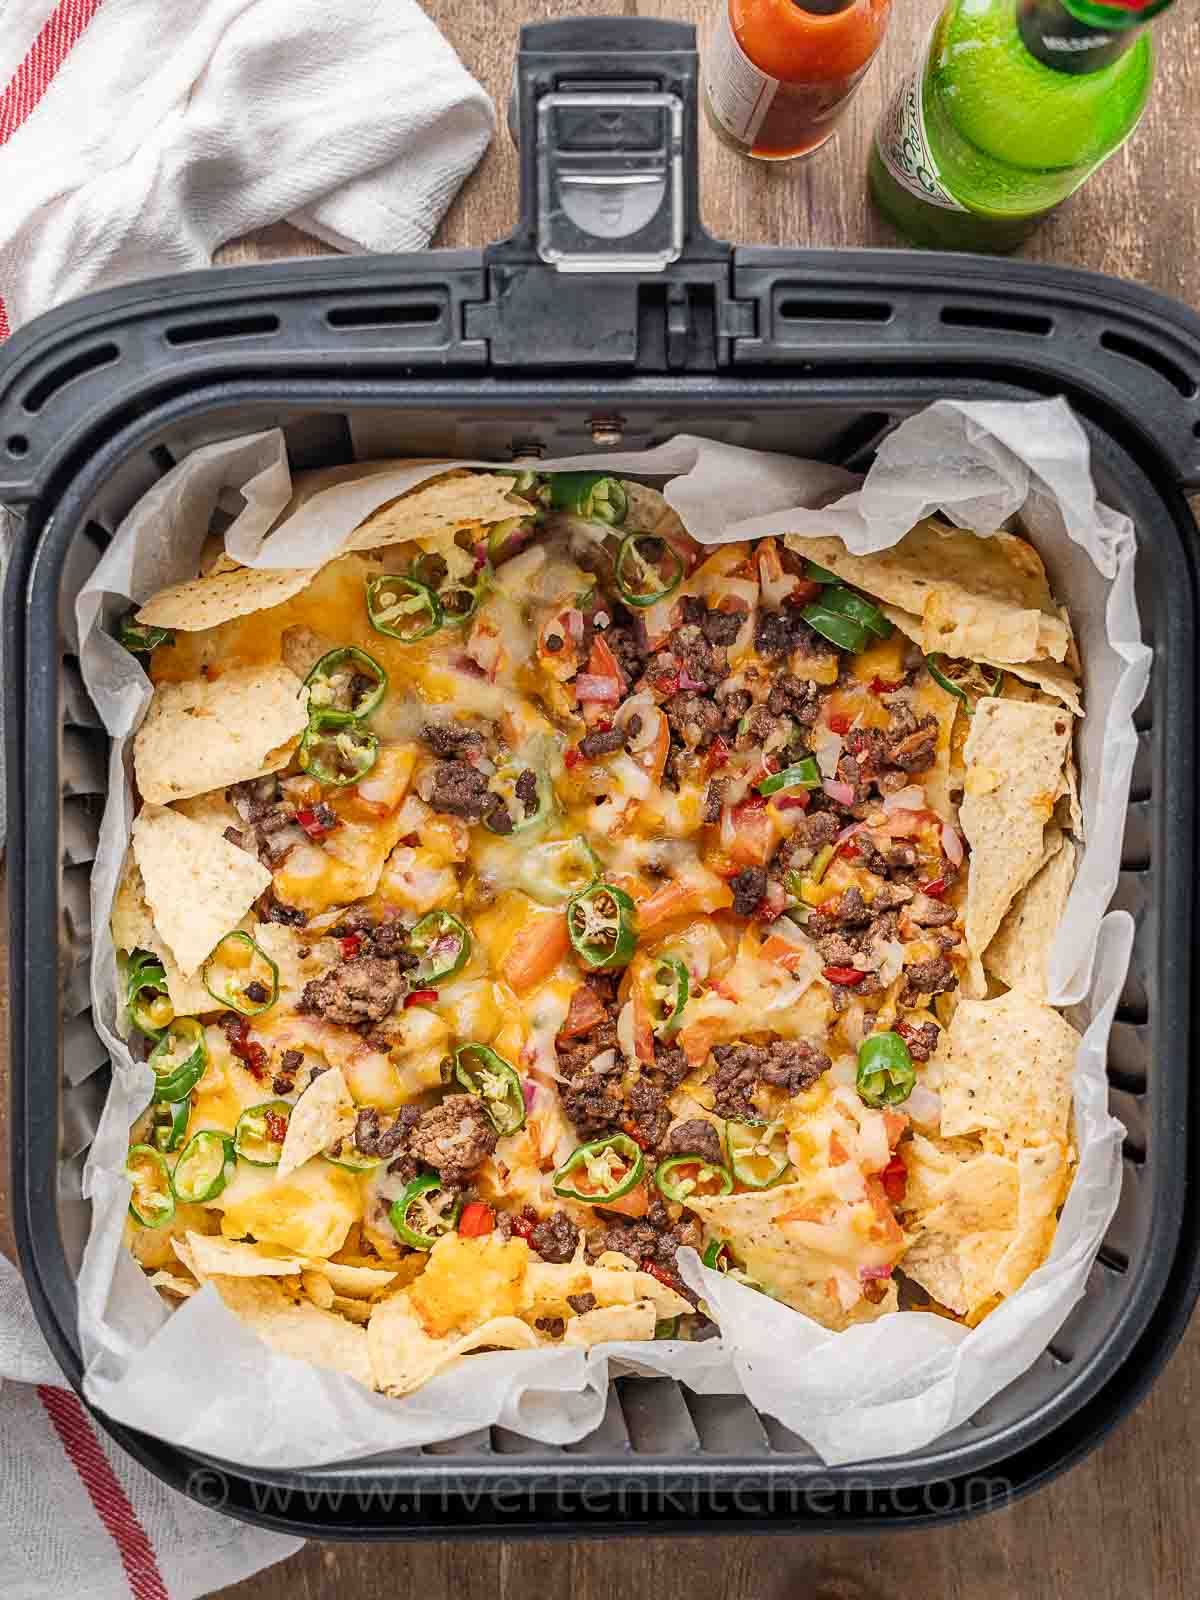 ground beef nachos with melted cheese cooked in an air fryer.